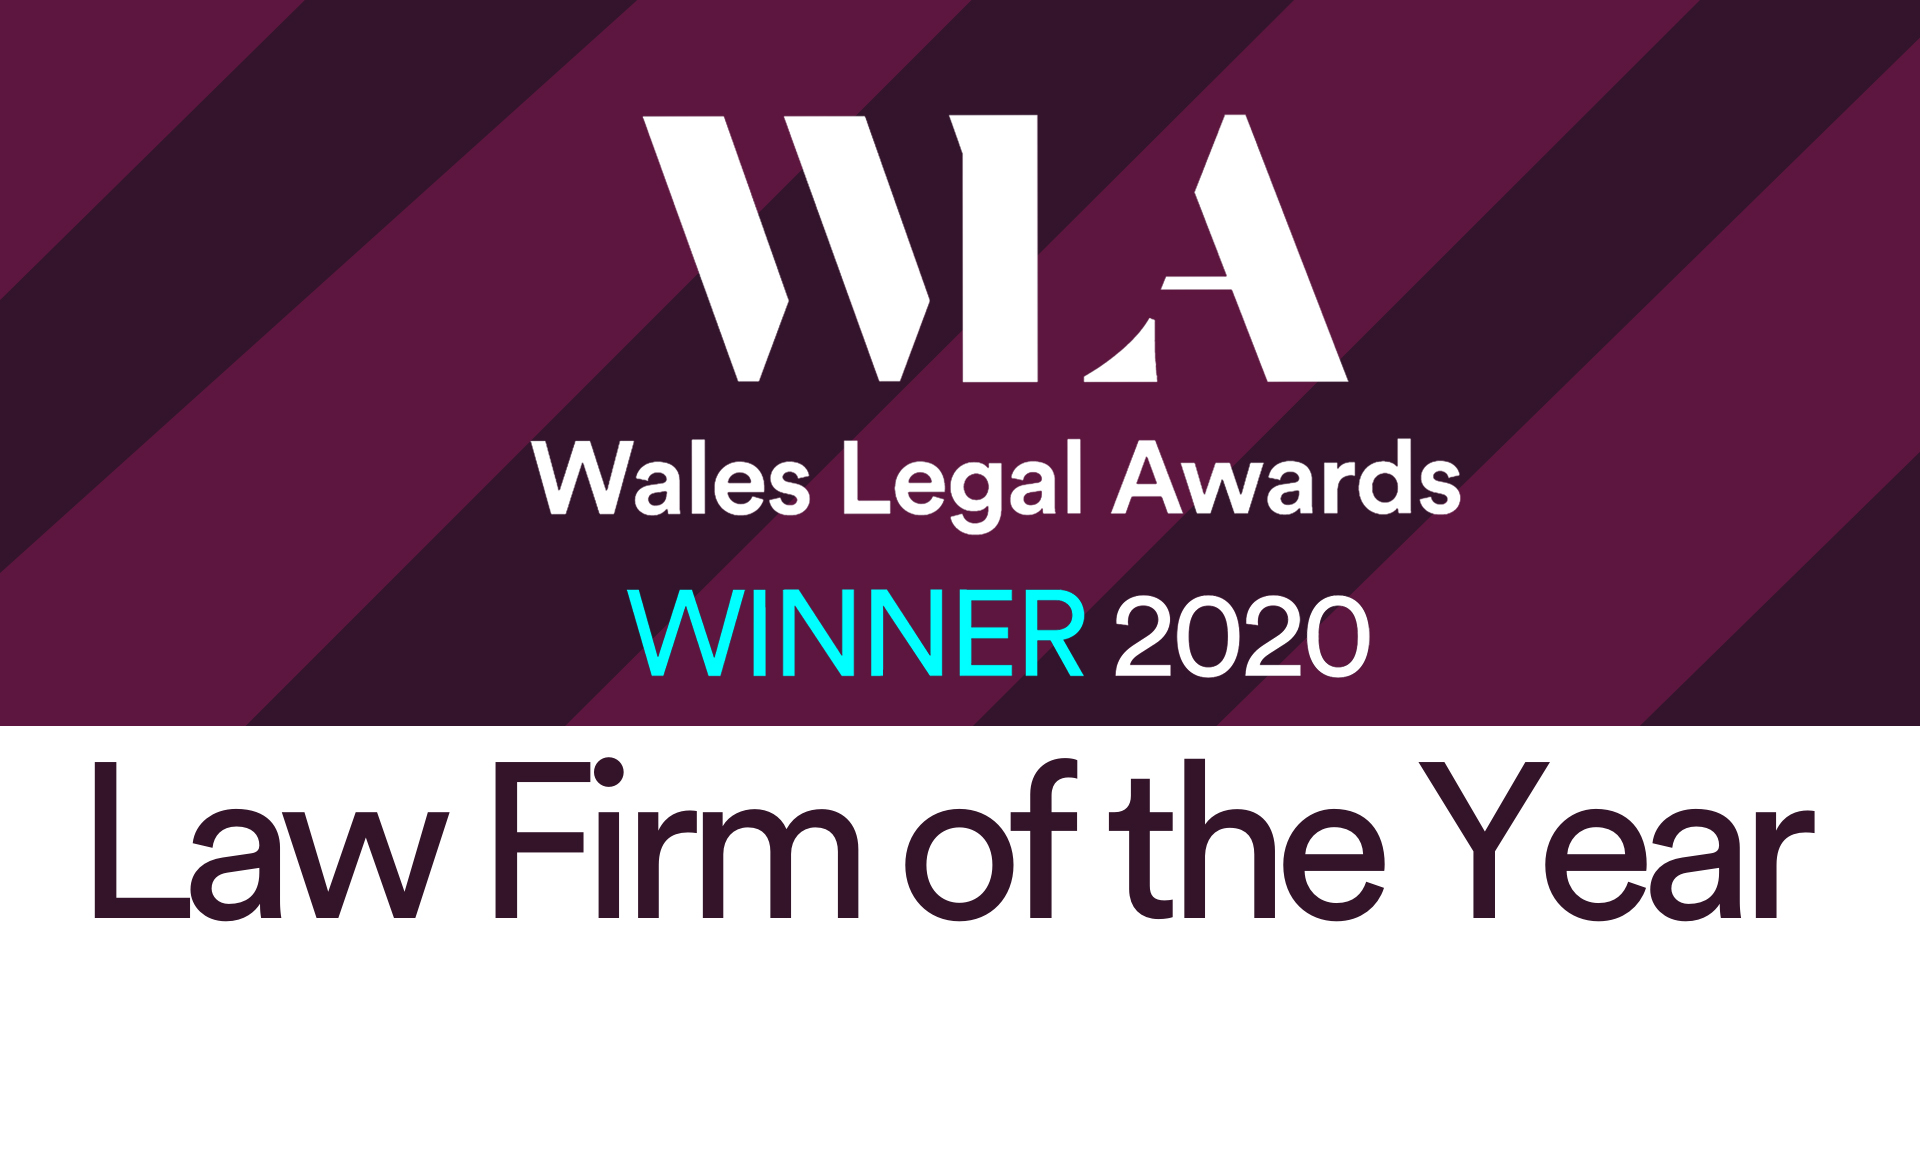 Wales Legal Awards 2020 Winner - Law Firm of the Year